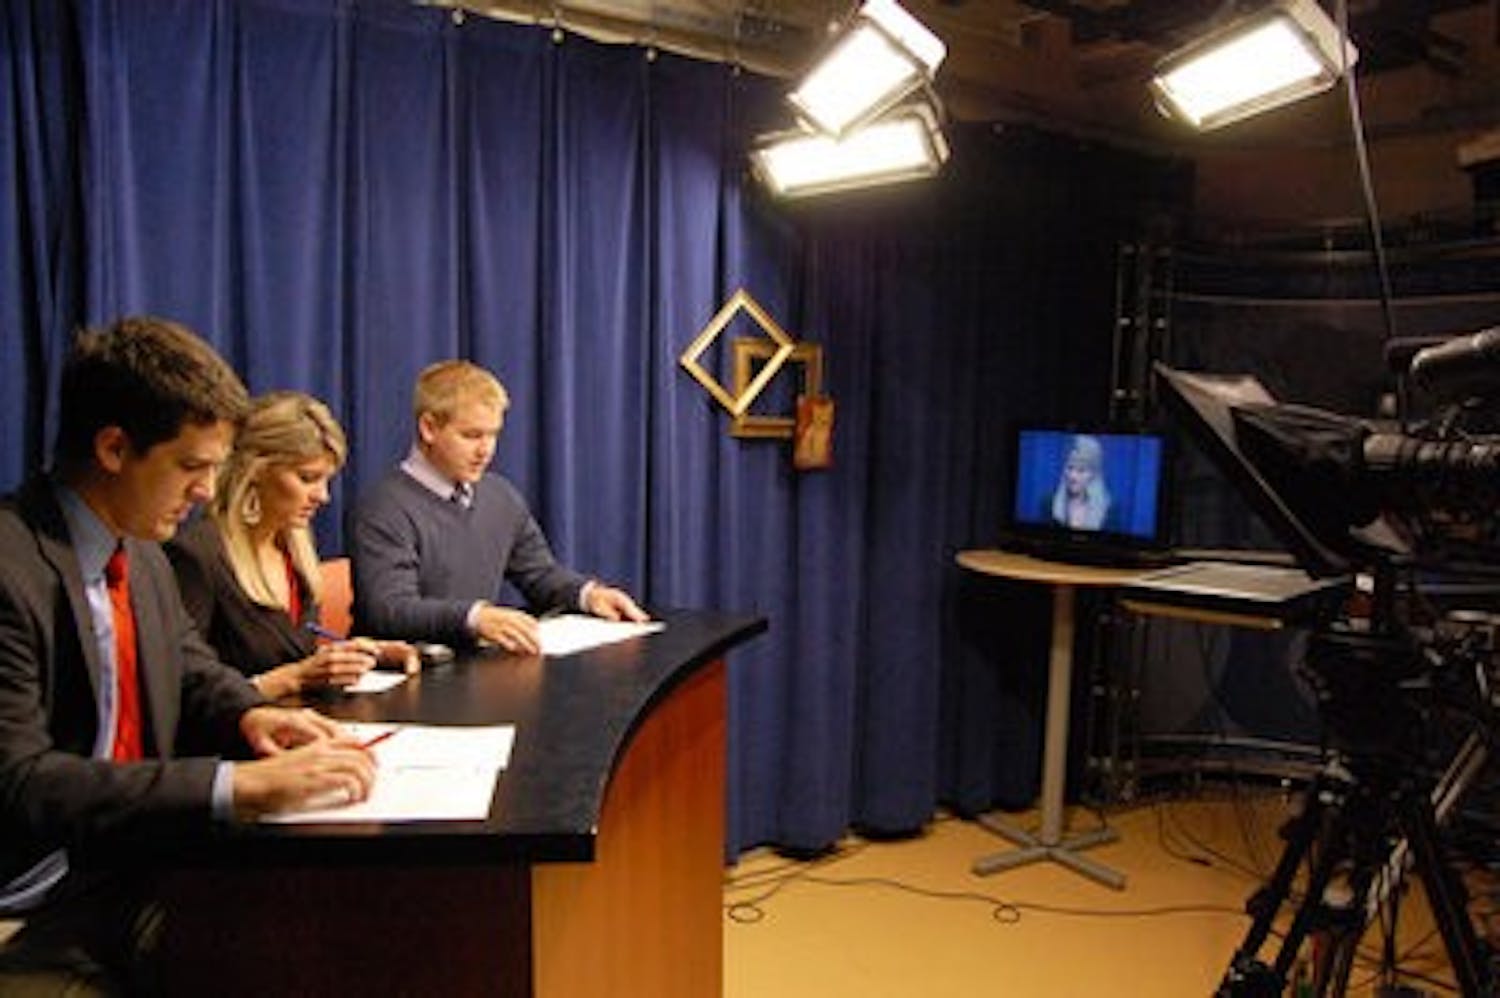 Matt Lally and Heather Galante, seniors in RTVF, and Danny O'Donnell, junior in RTVF, prepare for an upcoming newscast Monday. Eagle Eye TV broadcasts live three times a week. (Charlie Timberlake / ASSISTANT PHOTO EDITOR)